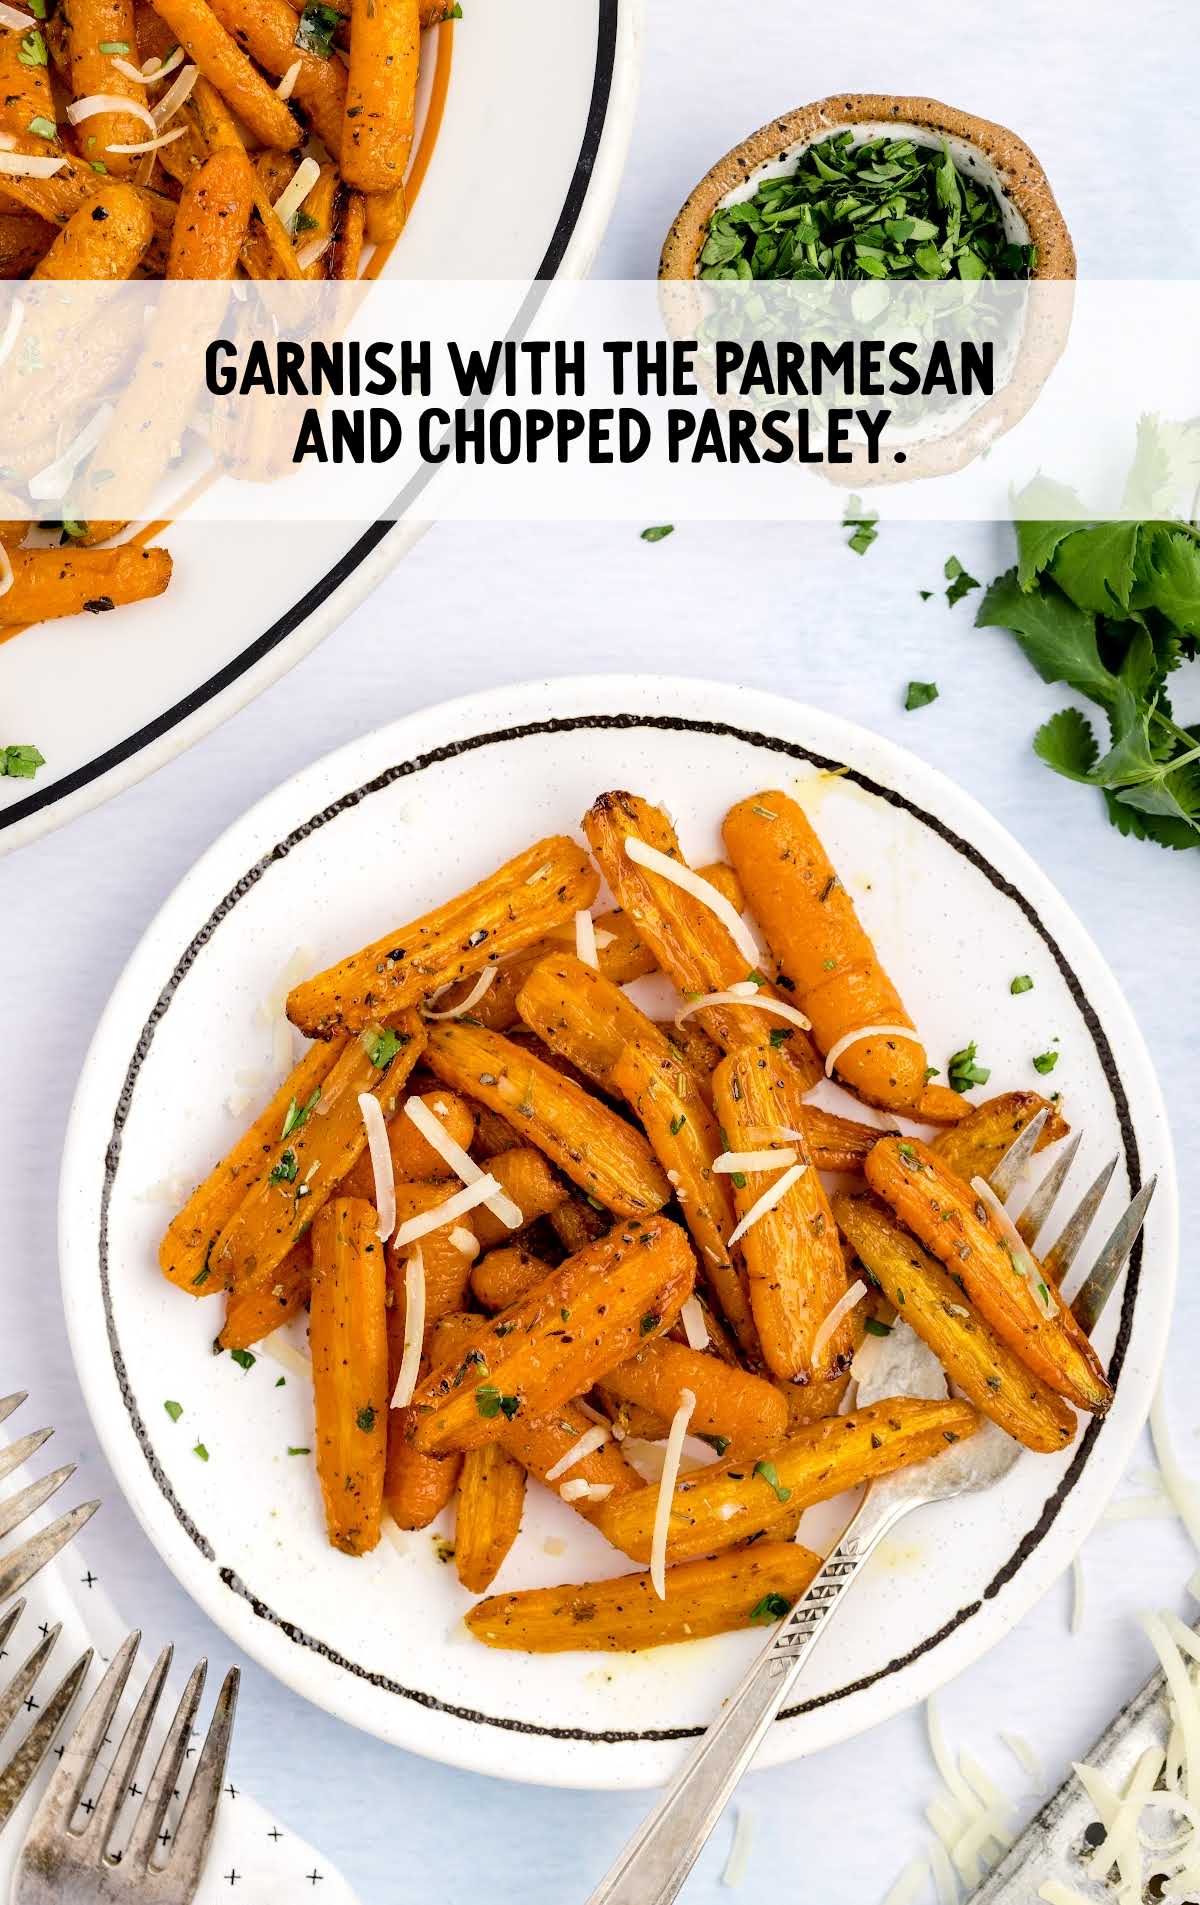 parmesan and parsley garnished on the carrots